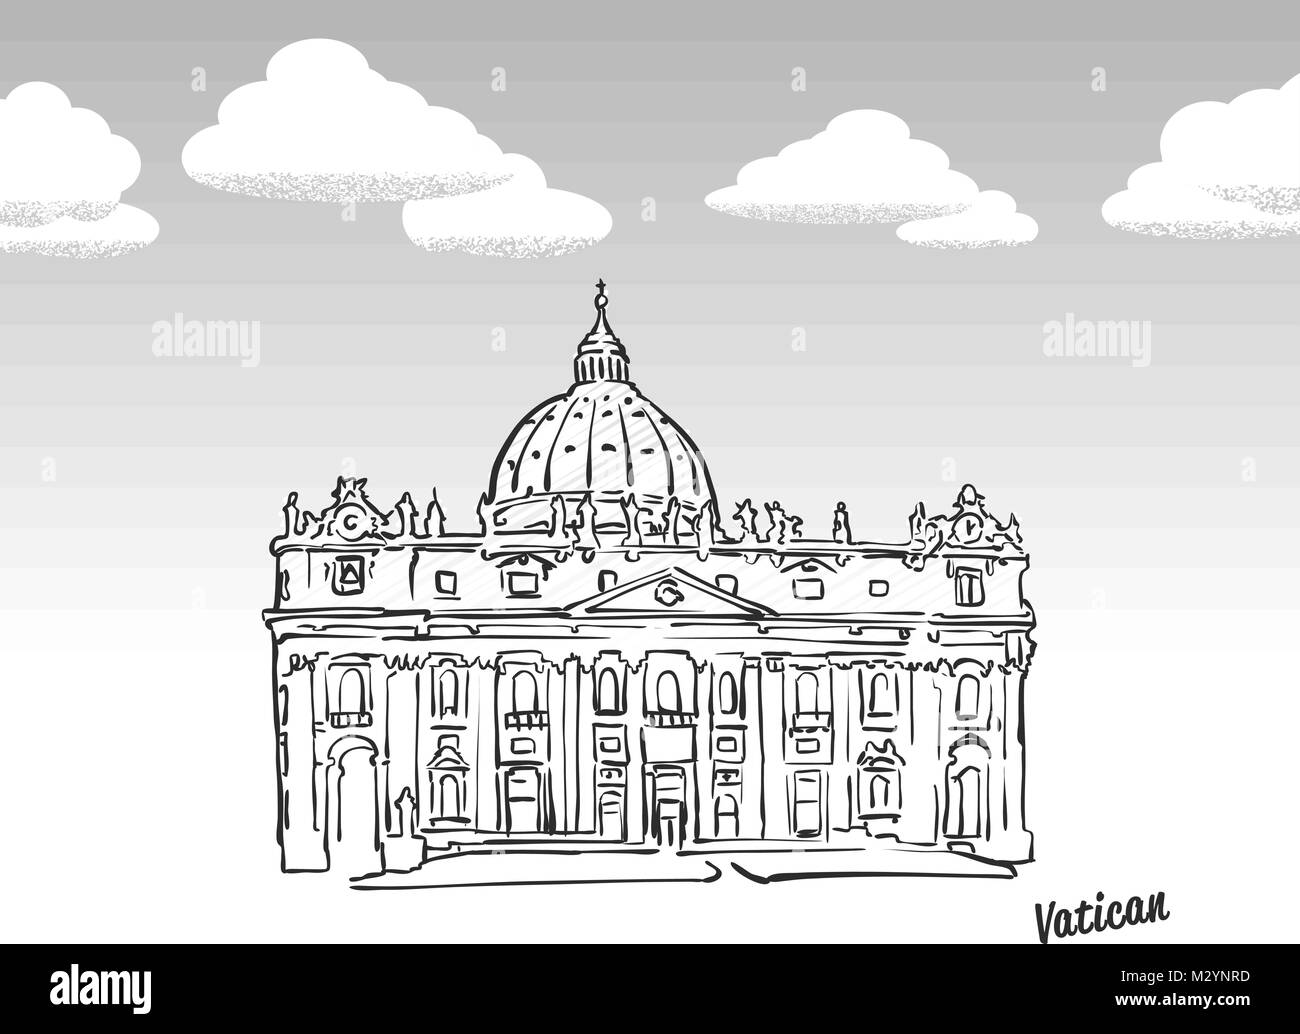 Vatican famous landmark sketch. Lineart drawing by hand. Greeting card icon with title, vector illustration Stock Vector